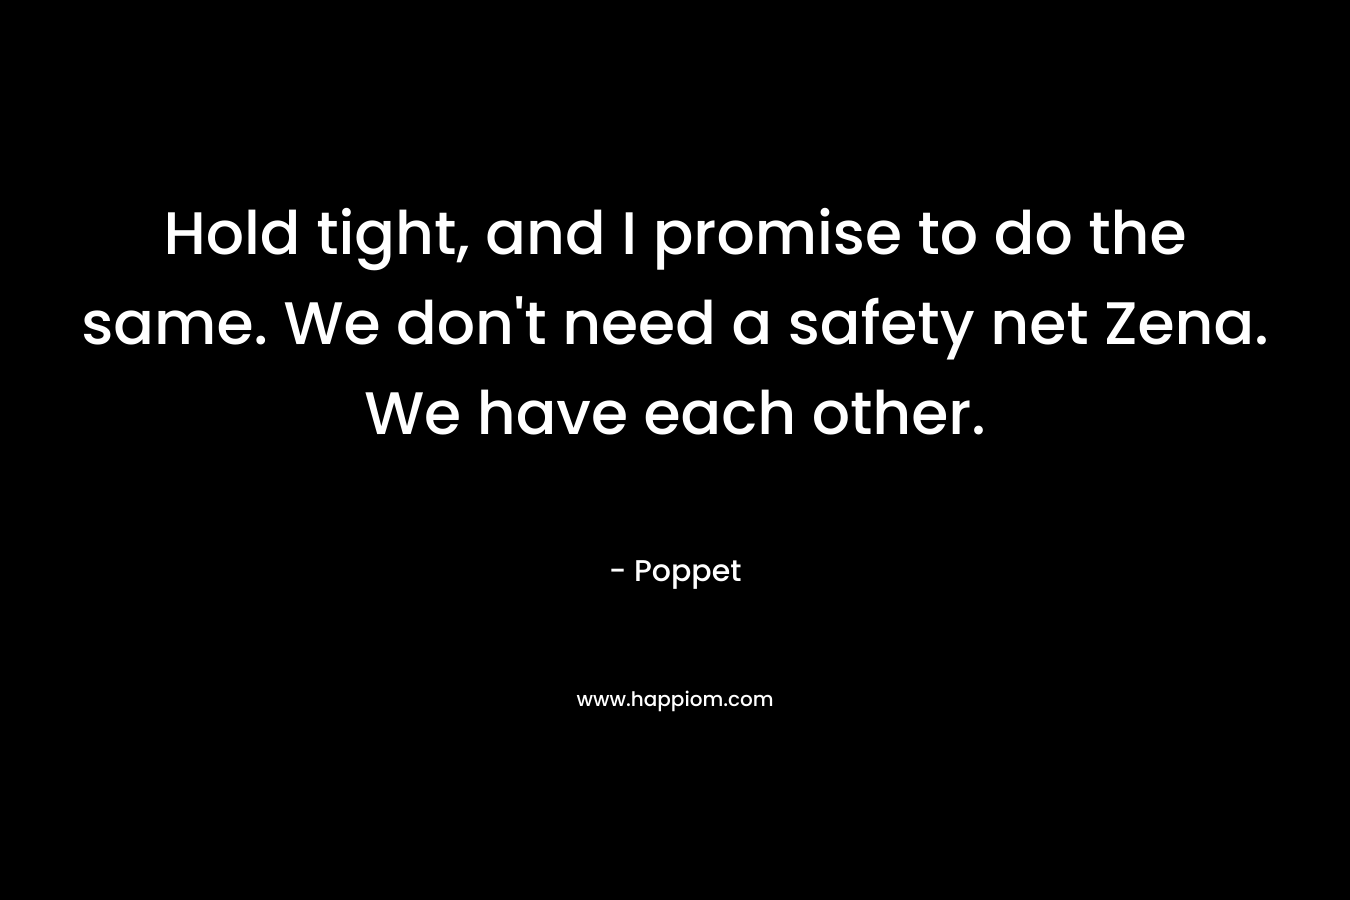 Hold tight, and I promise to do the same. We don’t need a safety net Zena. We have each other. – Poppet